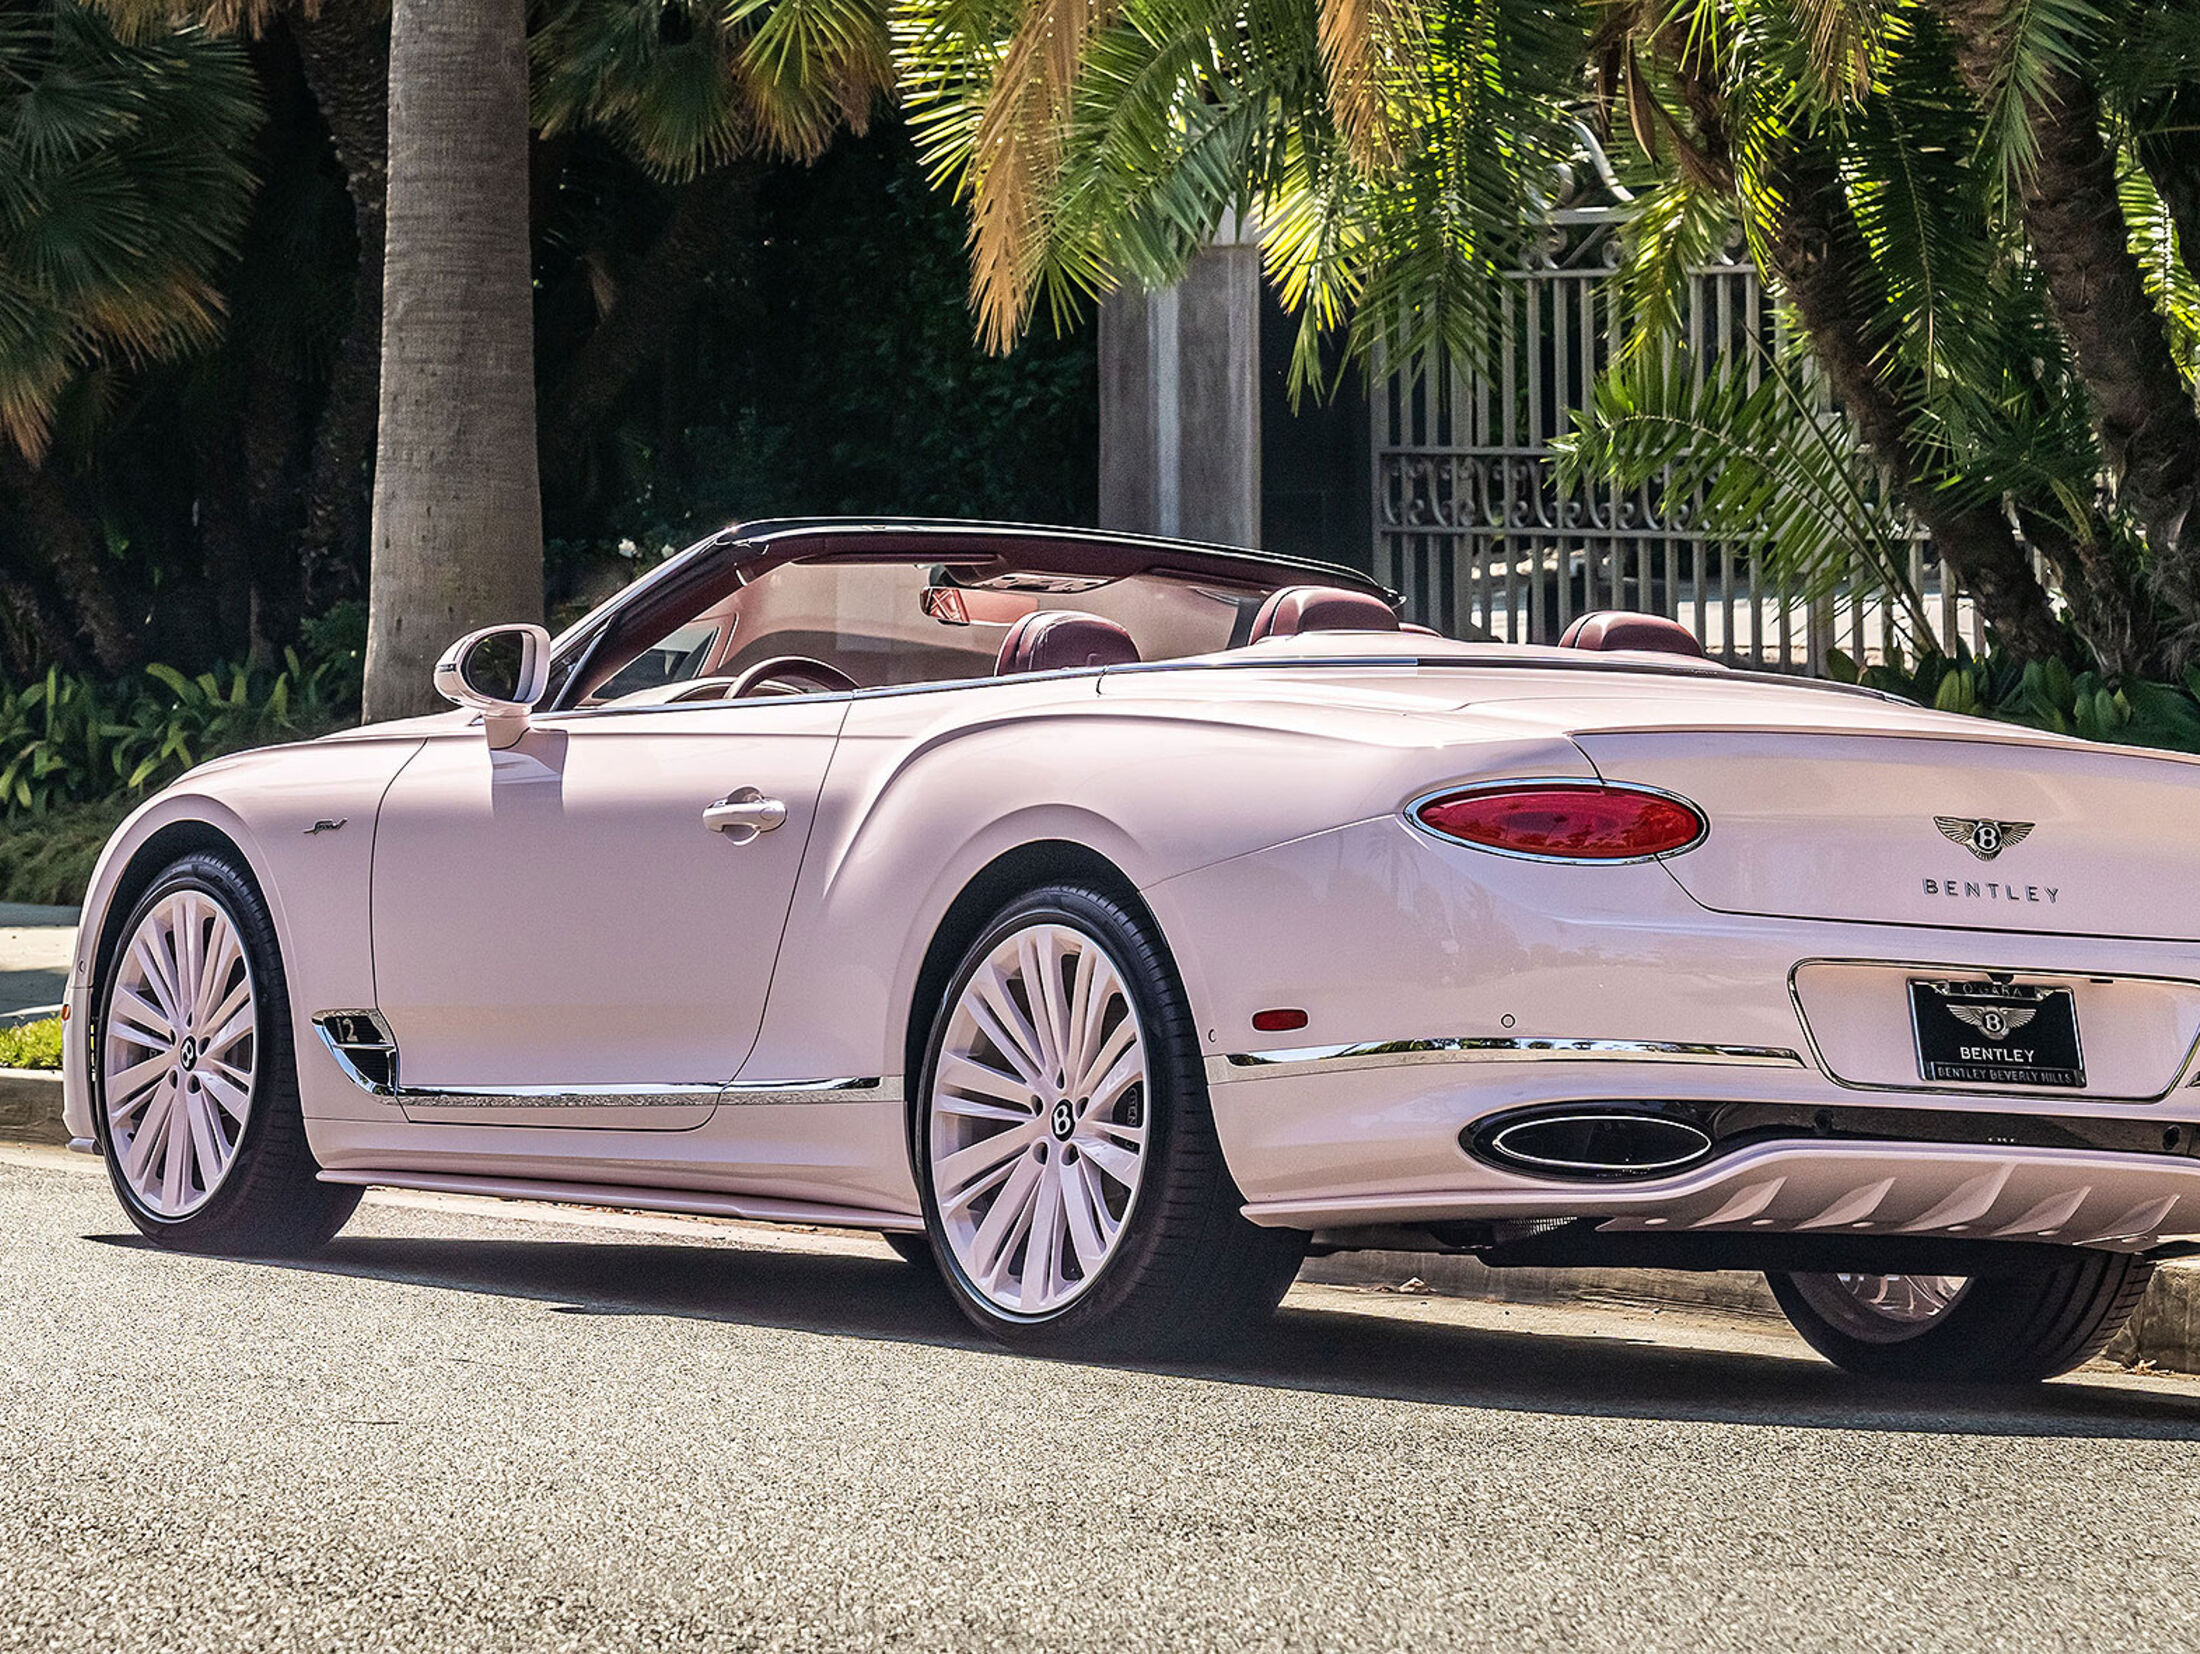 Bentley Beverly Hills Collection: Continental GTC in Pastellfarben